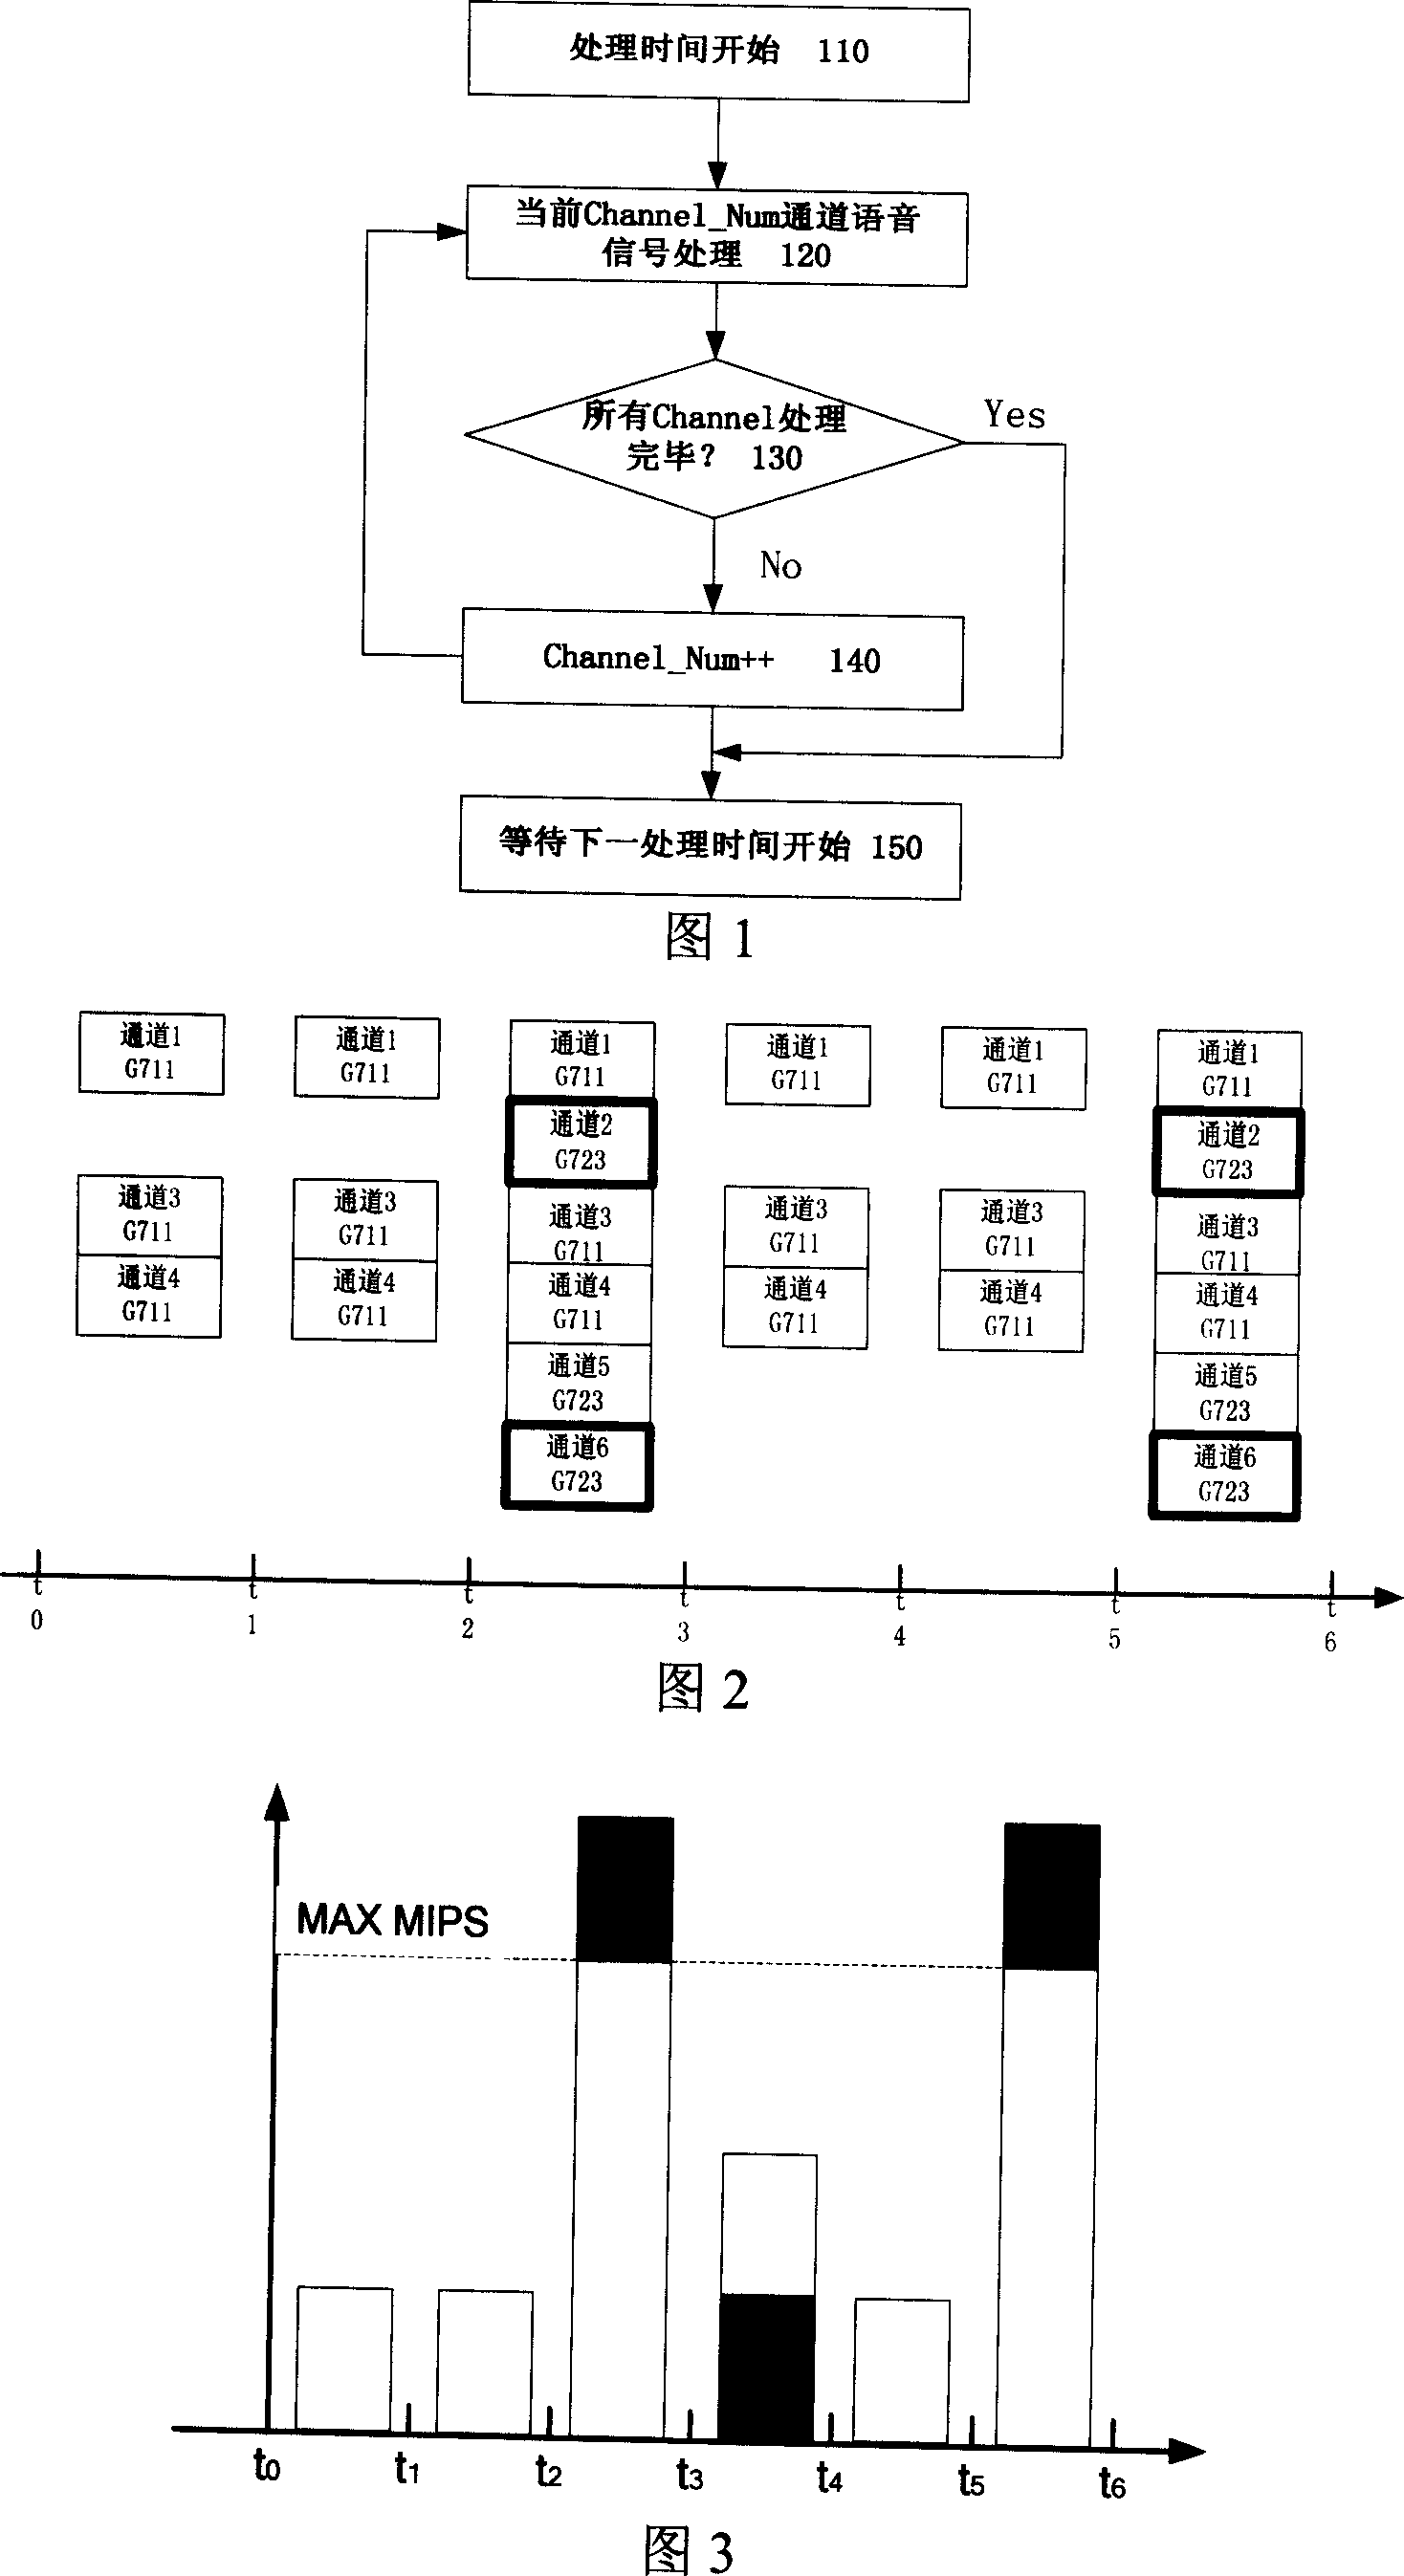 Single-chip based multi-channel multi-voice codec scheduling method